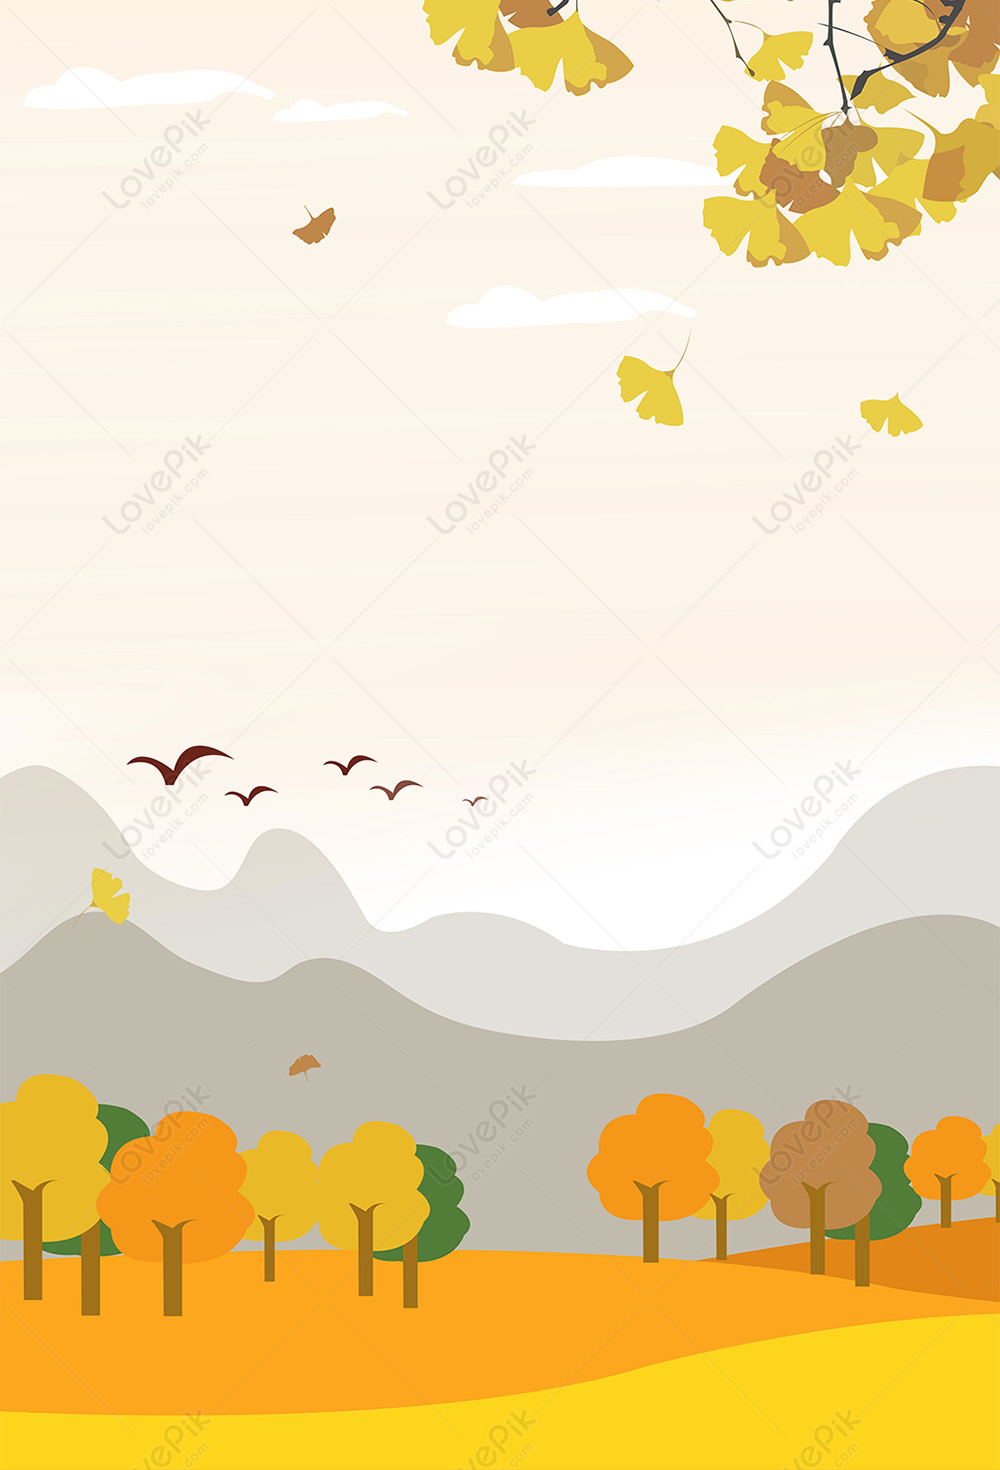 Autumn Poster Background Download Free | Poster Background Image on ...